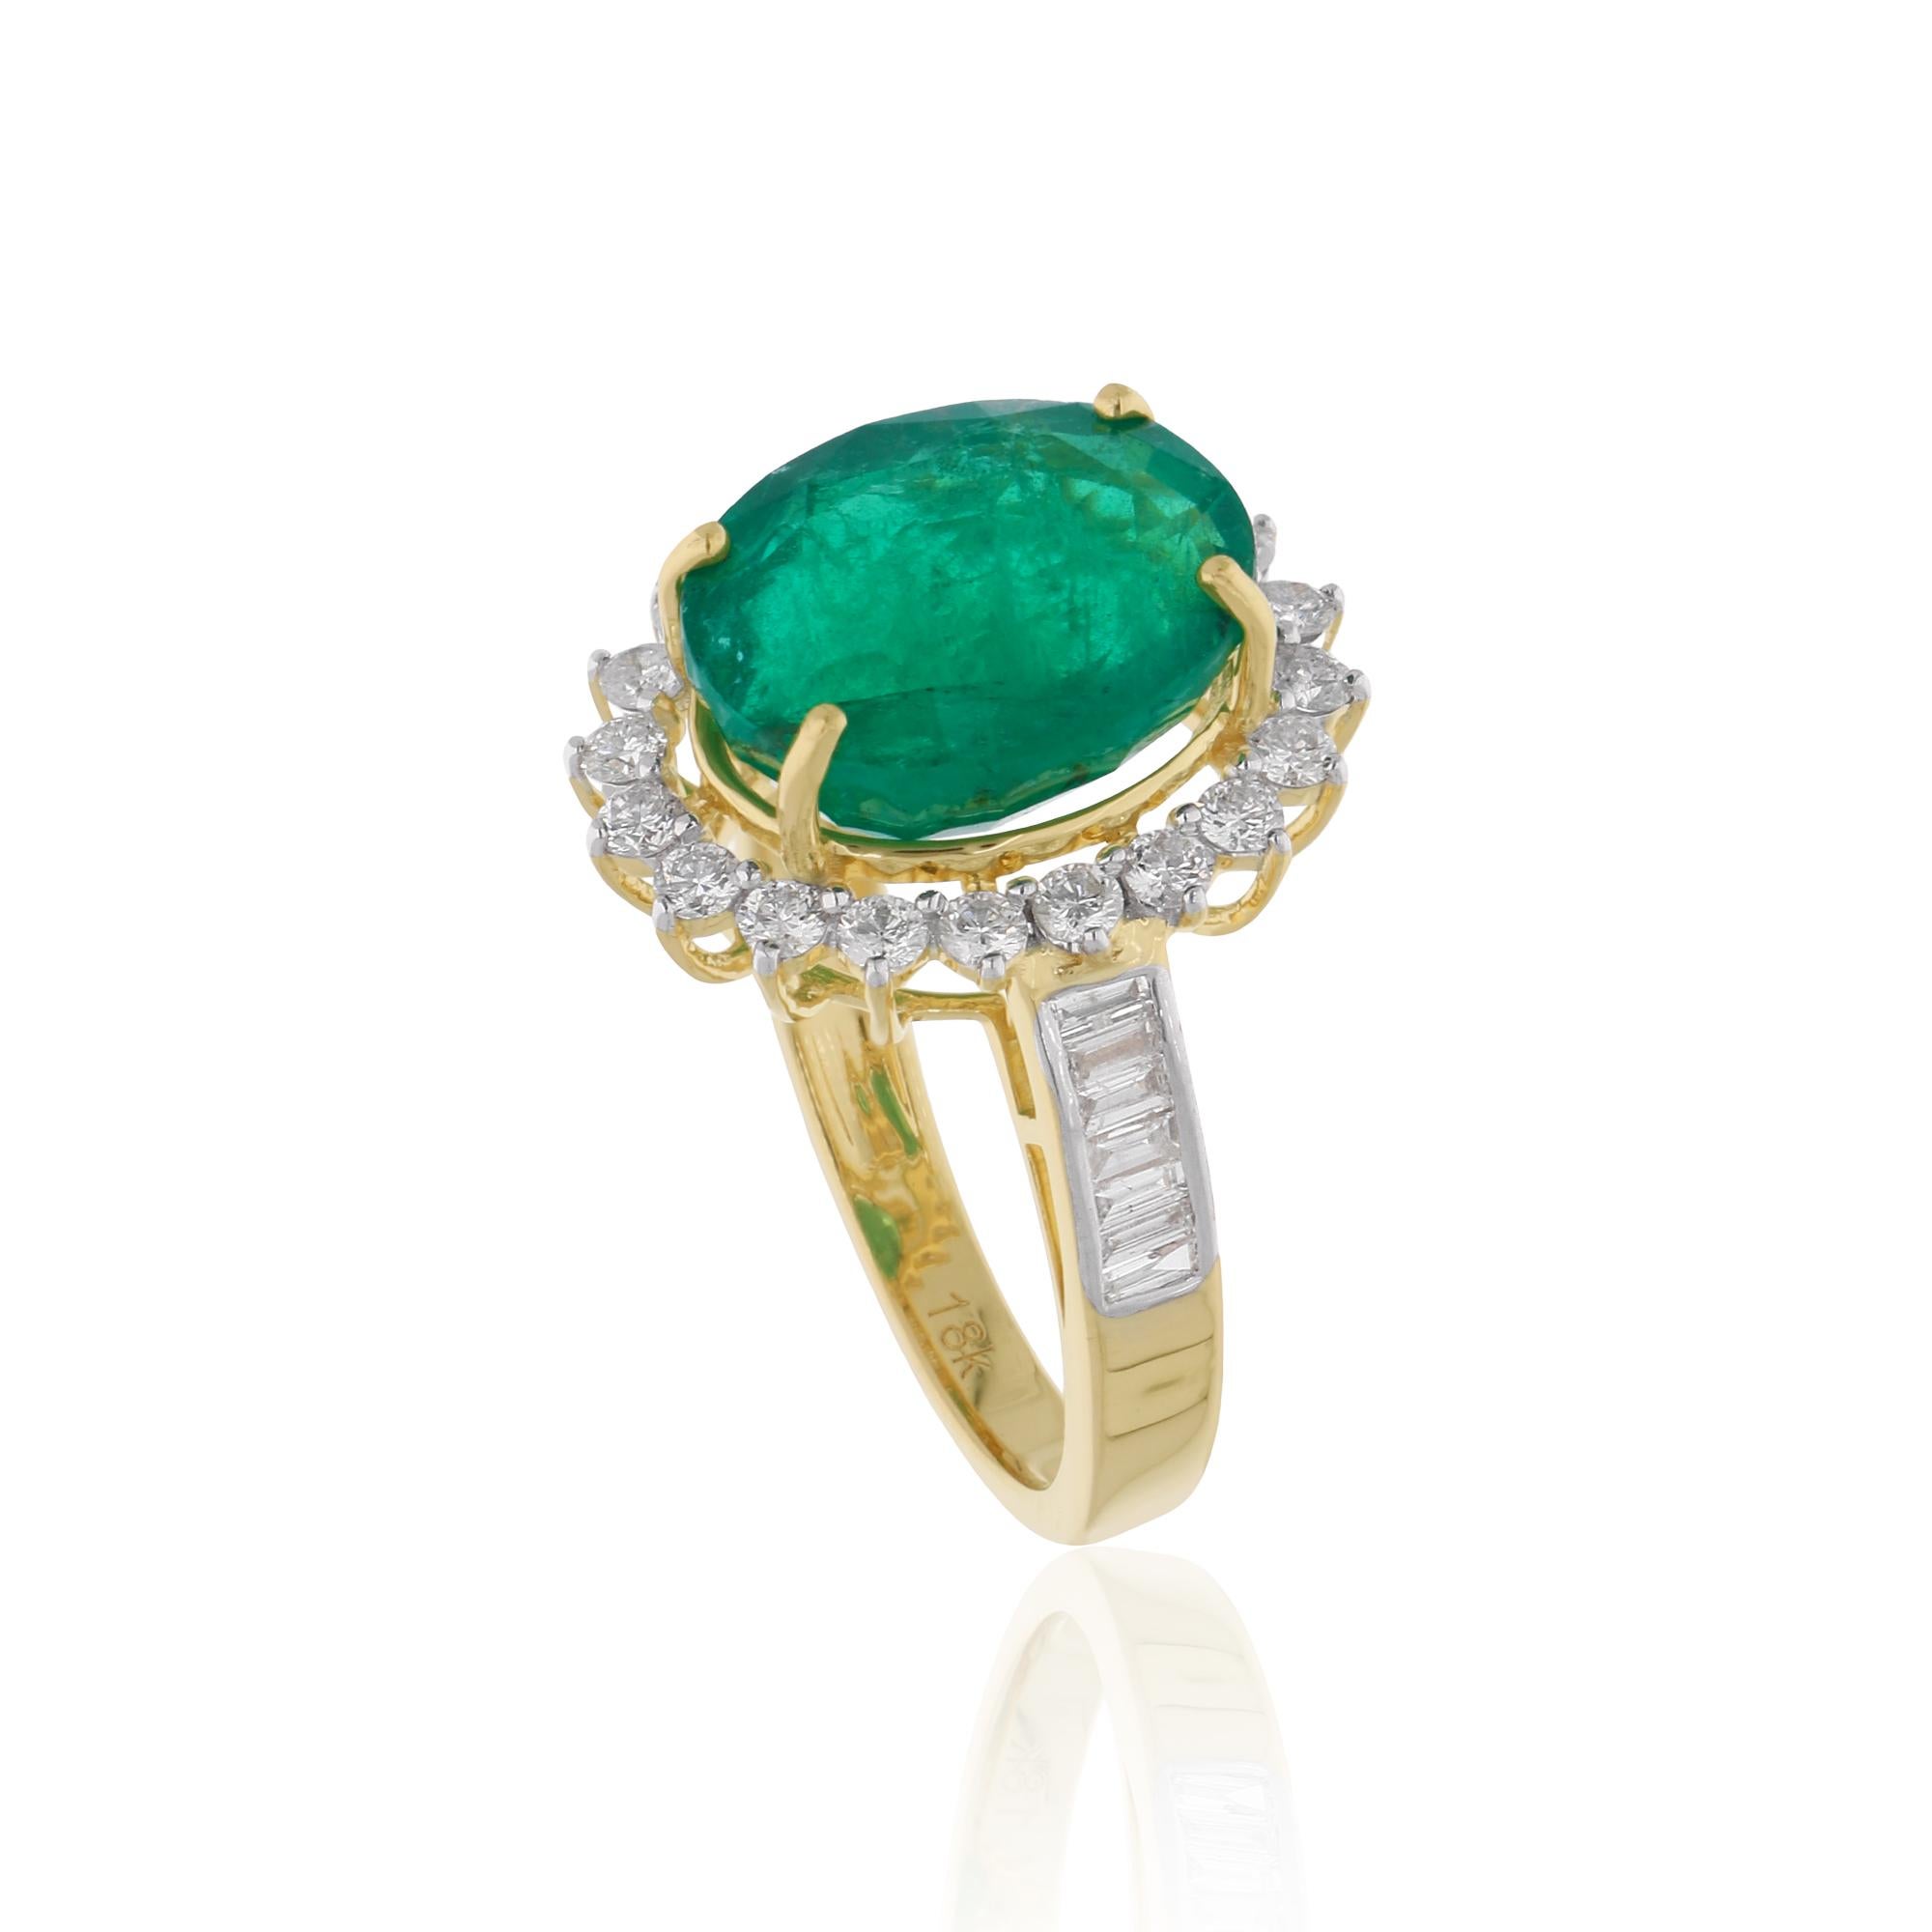 For Sale:  Real Oval Zambian Emerald Gemstone Cocktail Ring Diamond 18k Yellow Gold Jewelry 2